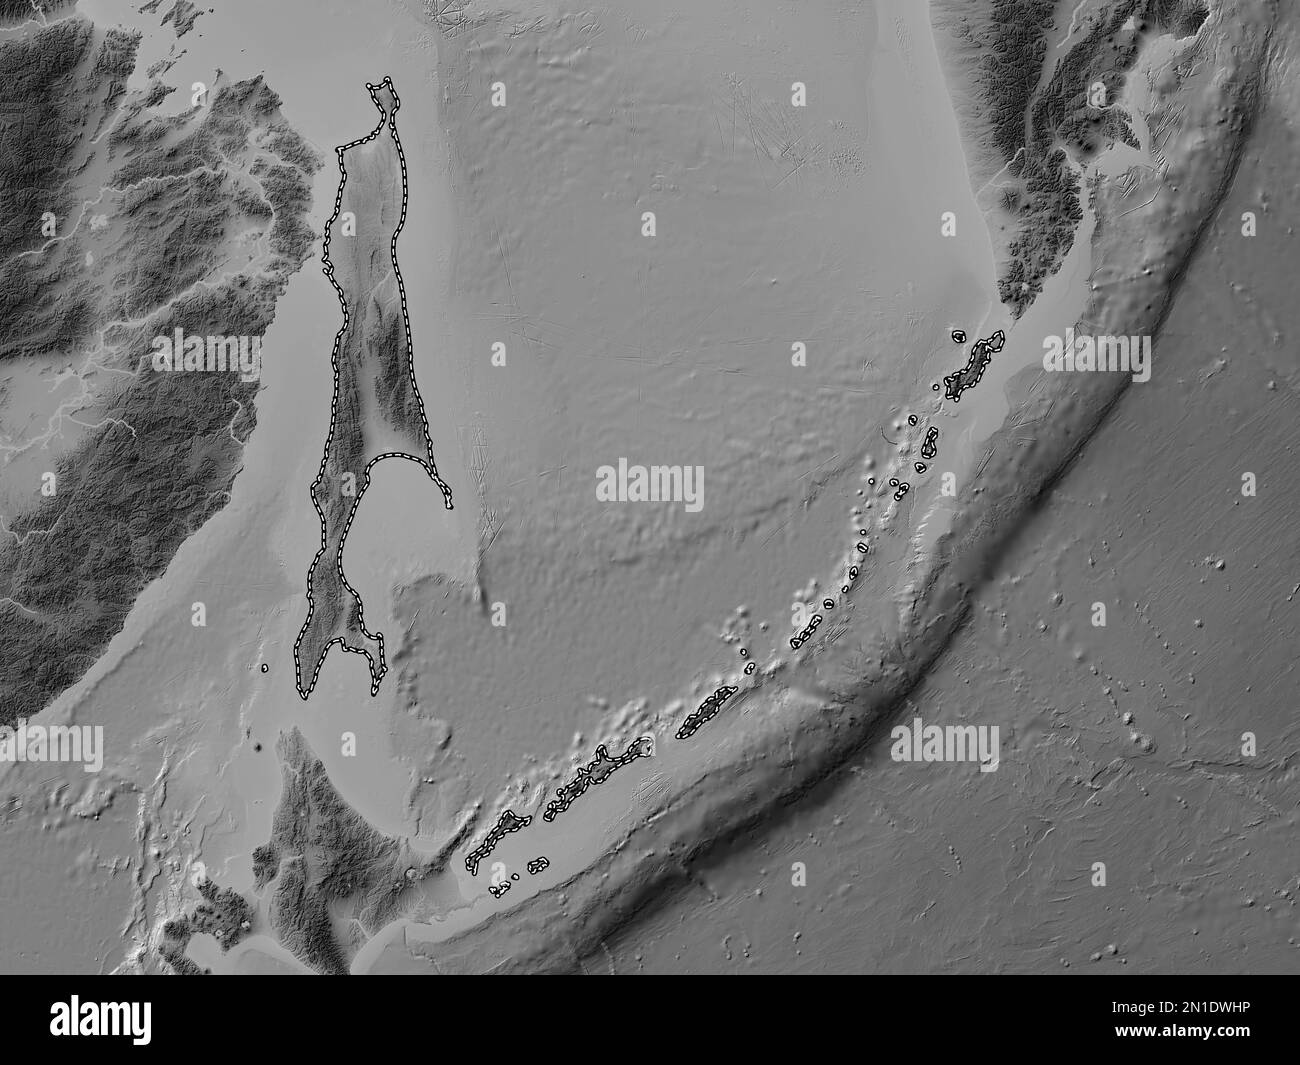 Sakhalin, region of Russia. Grayscale elevation map with lakes and rivers Stock Photo